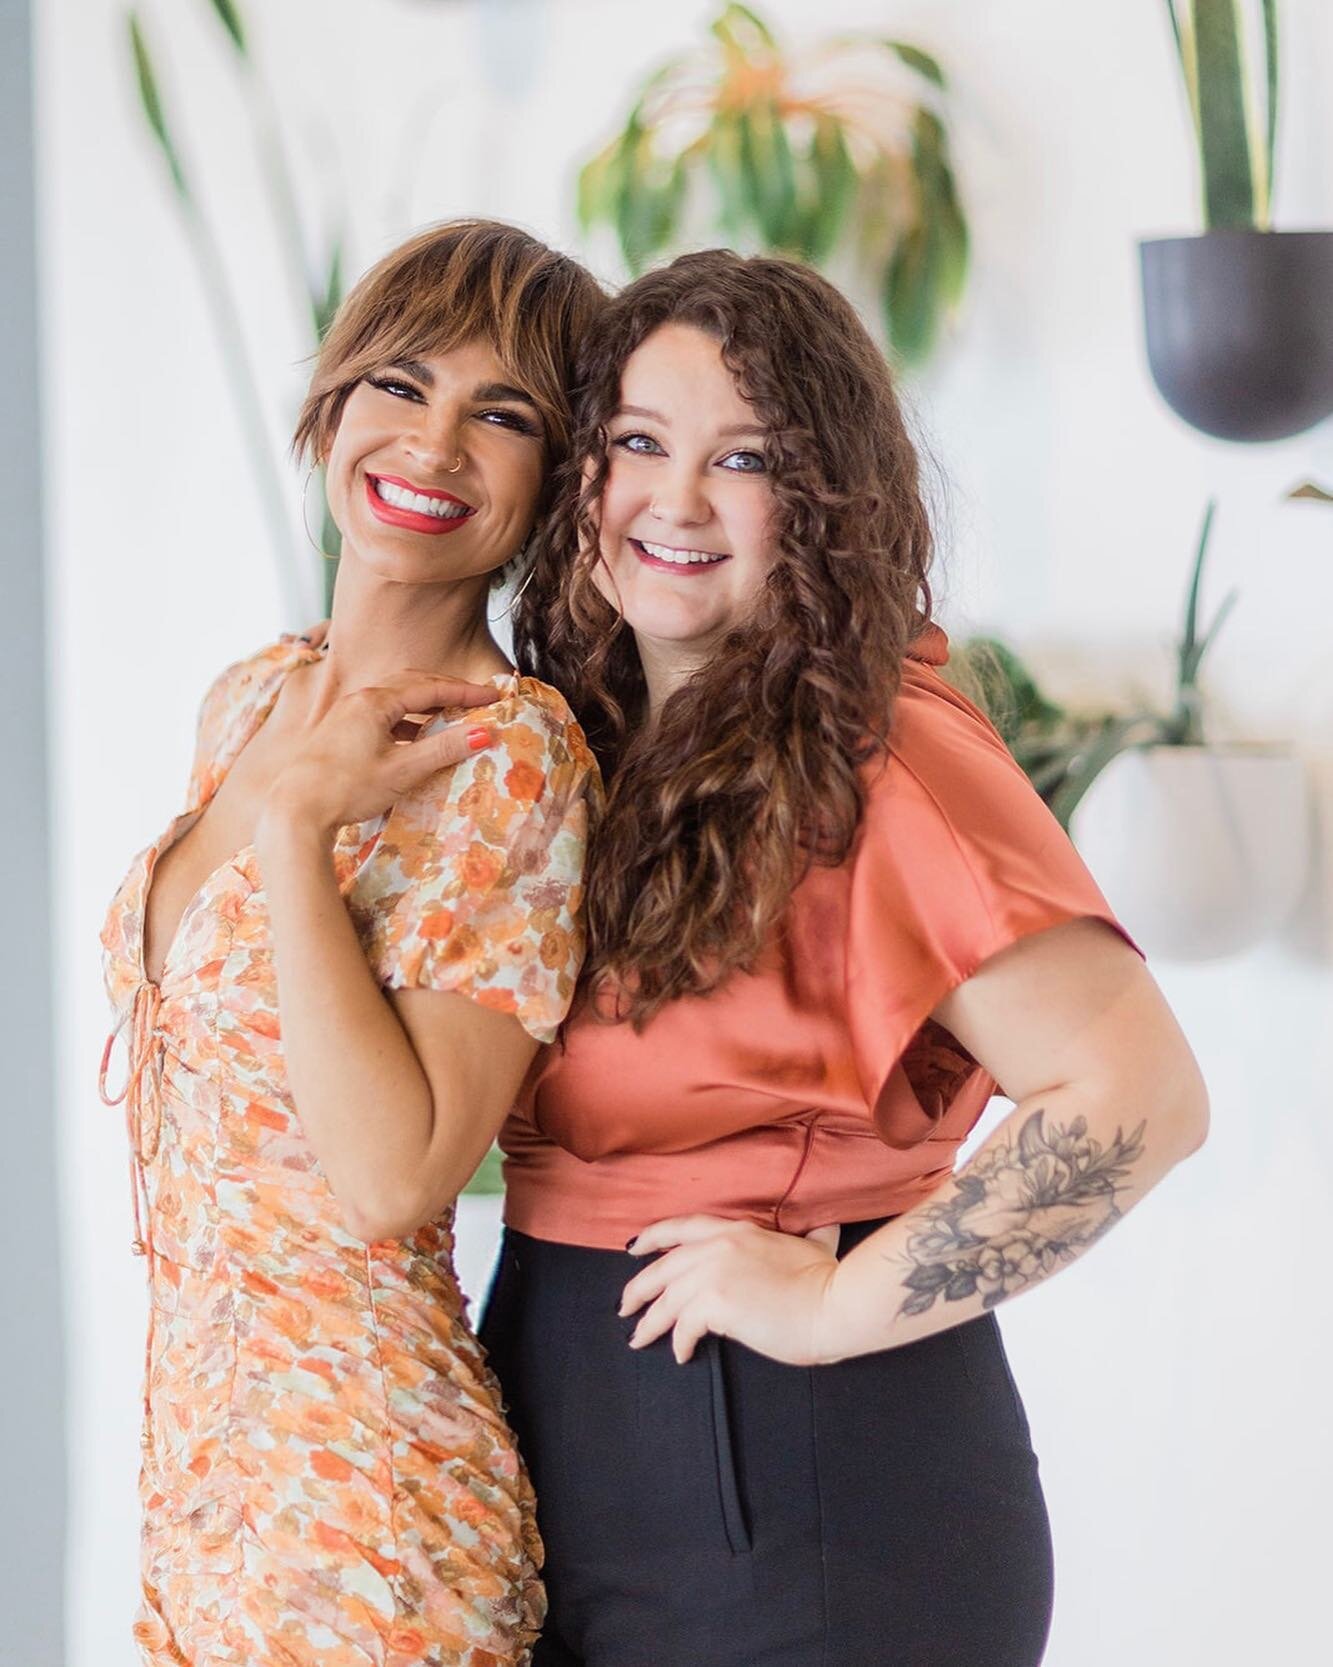 At Evolve Hair Design, we believe that teamwork truly makes the dream work! As leaders, Joan and Megan cultivate an environment of support, growth, and empowerment for our entire team. We are proud to have a group of talented stylists who share our p